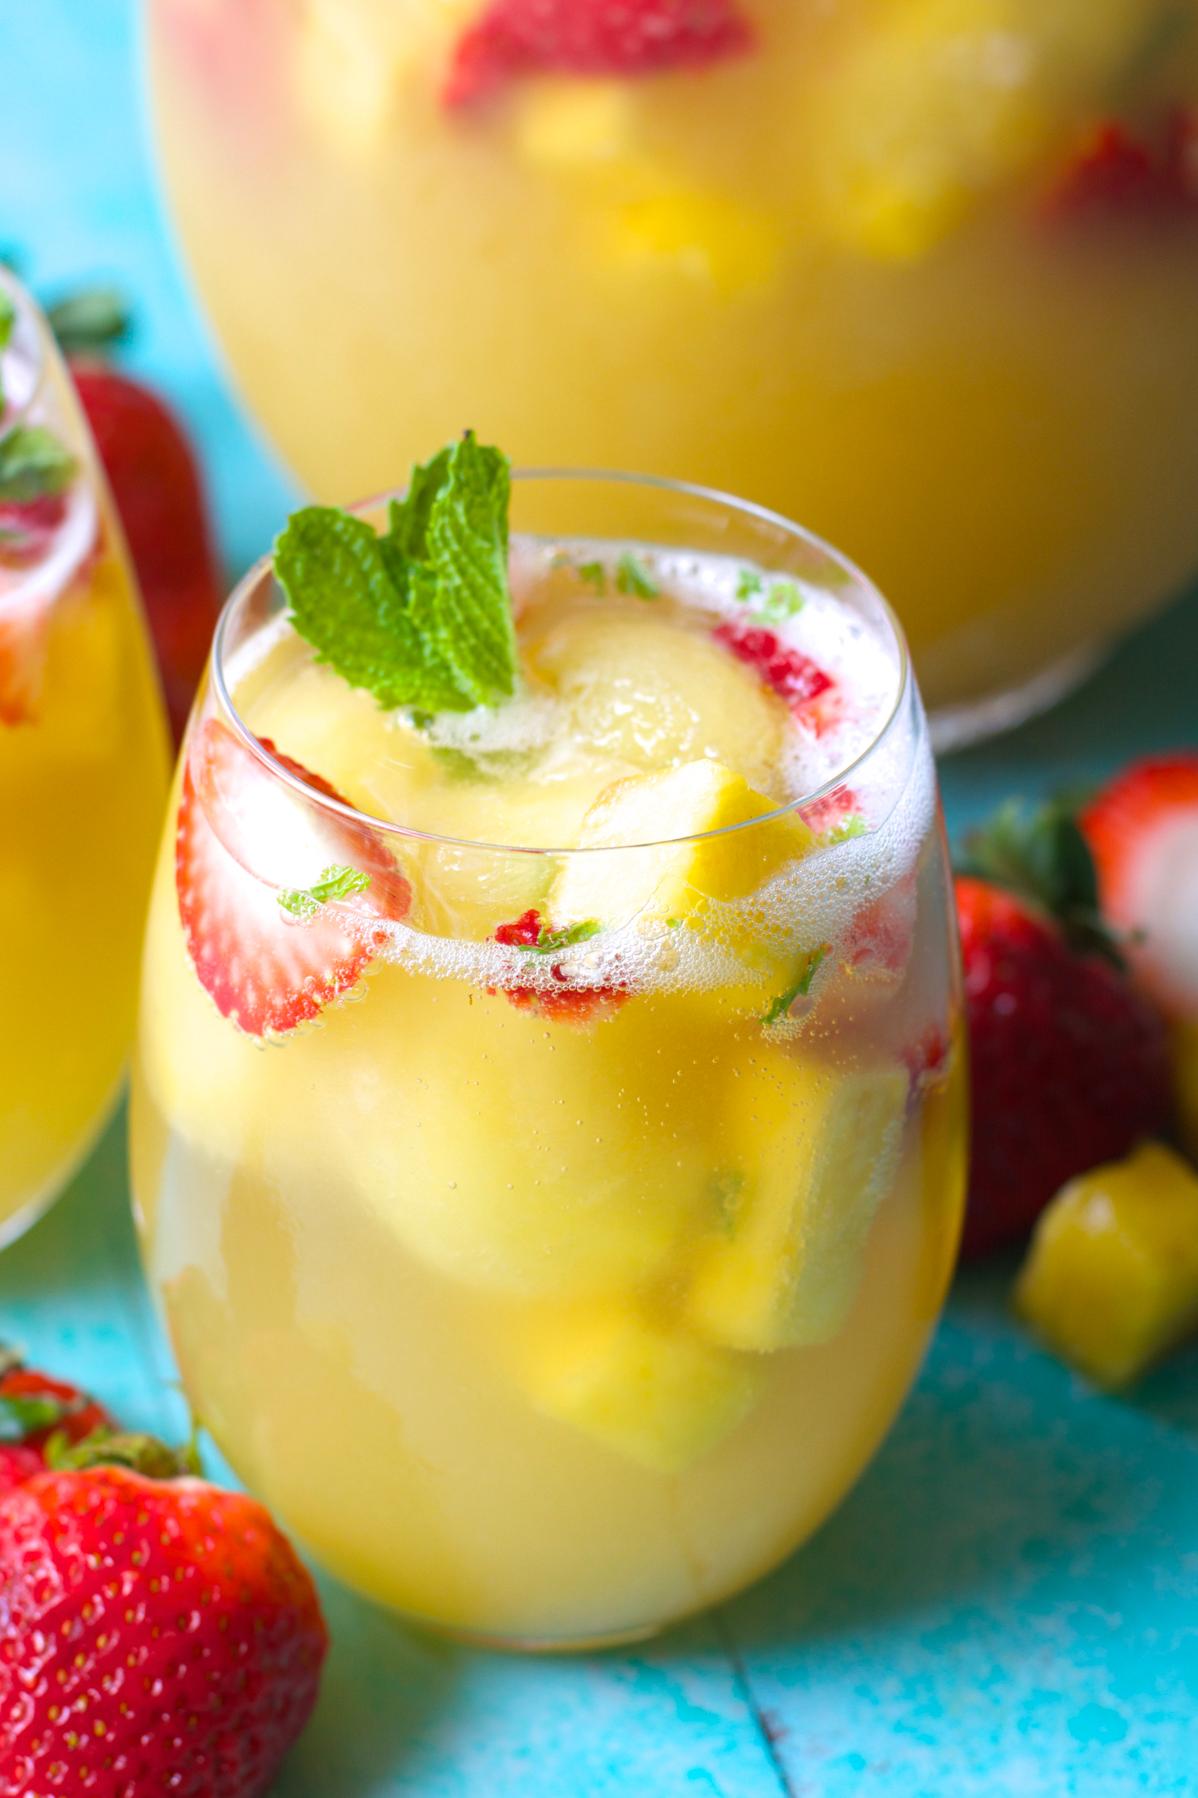  A stunning punch that'll impress your guests.